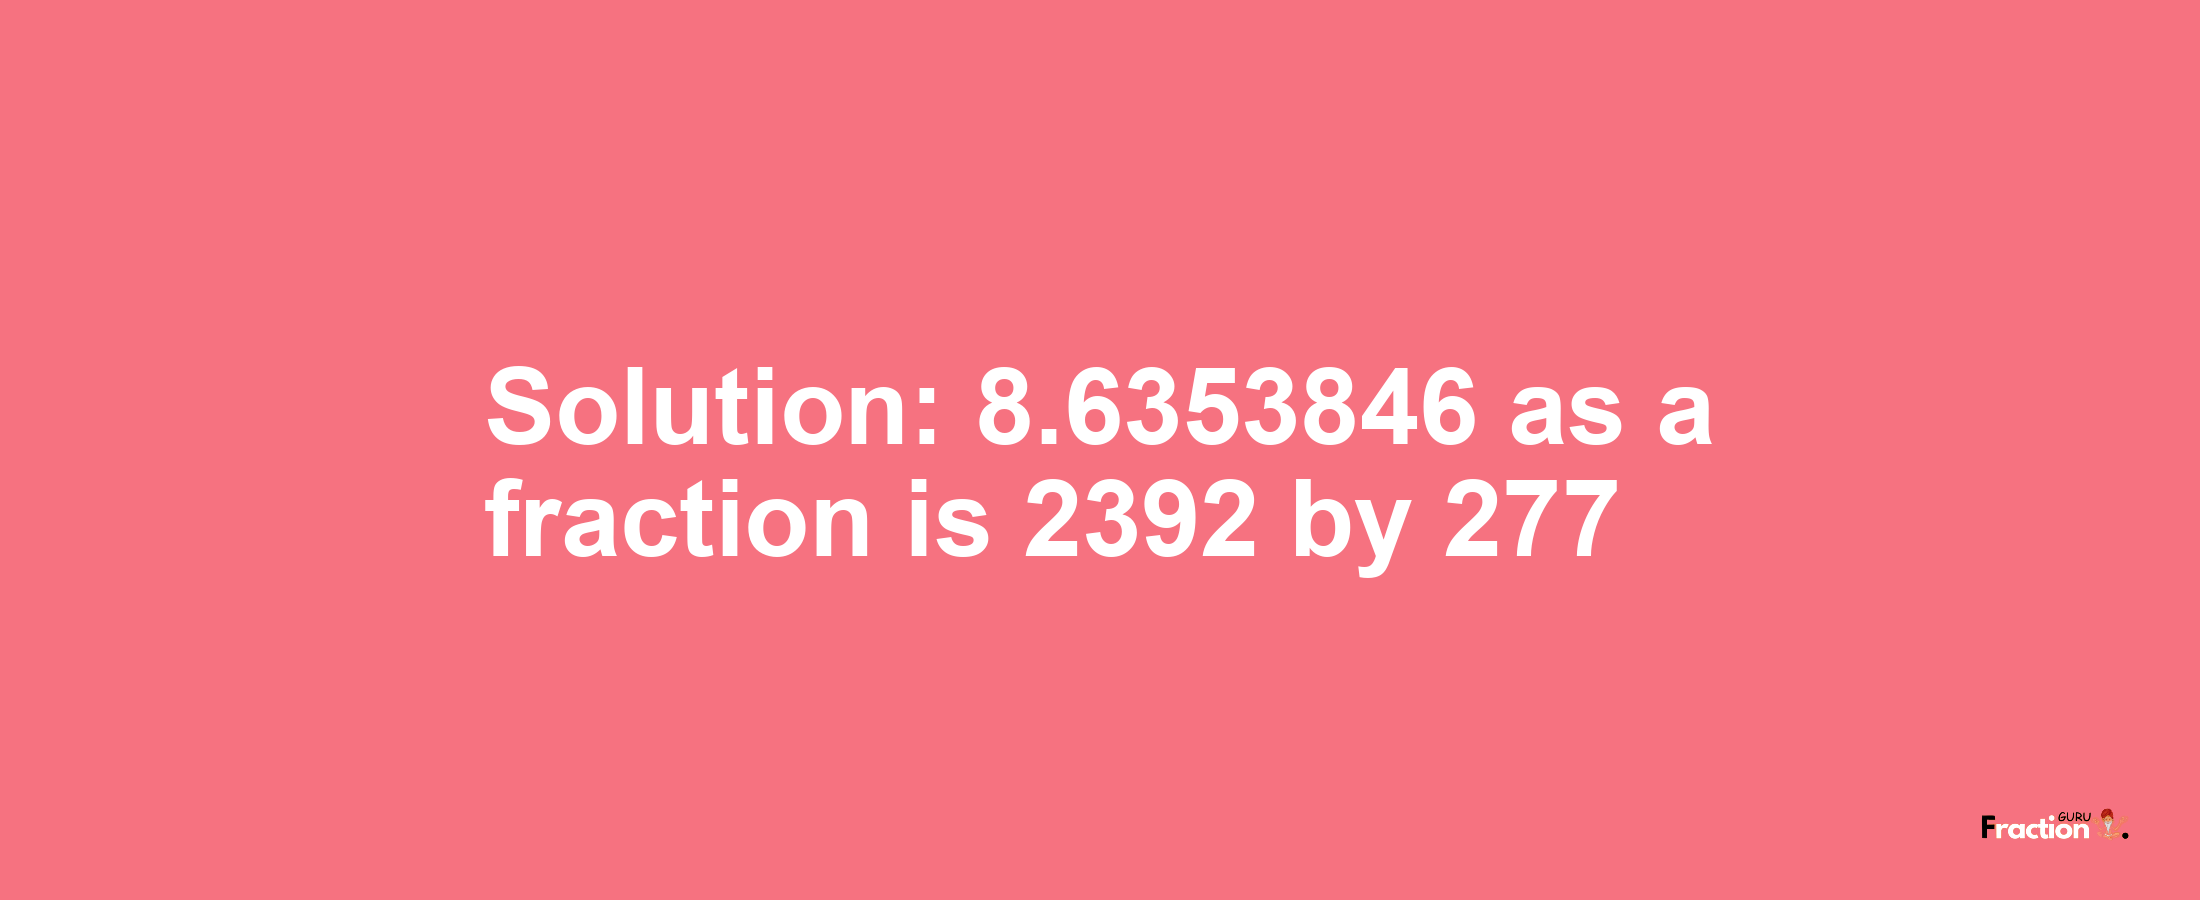 Solution:8.6353846 as a fraction is 2392/277